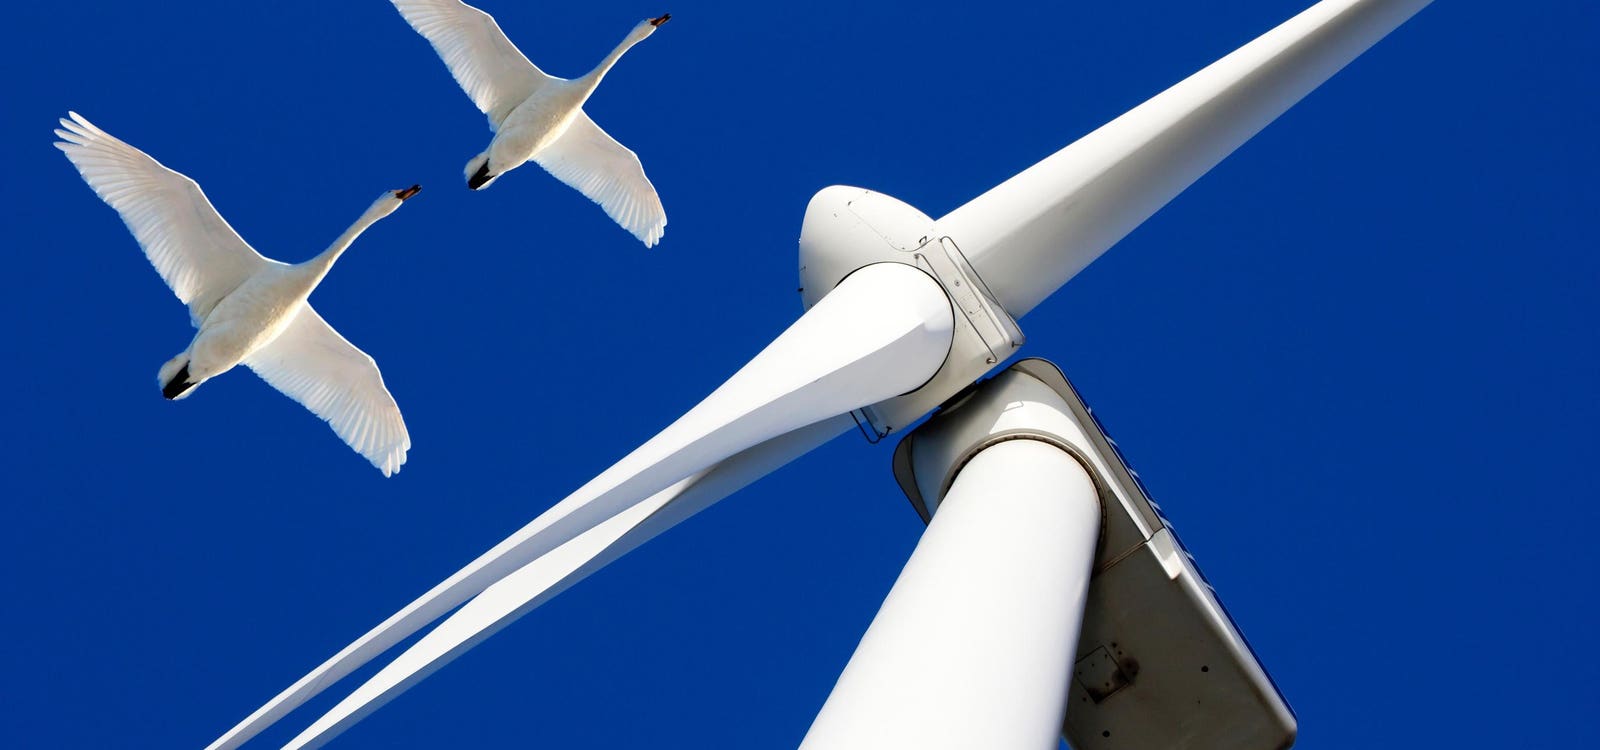 Science Offers A New Way To Save Birds From The Jaws Of Wind Turbines